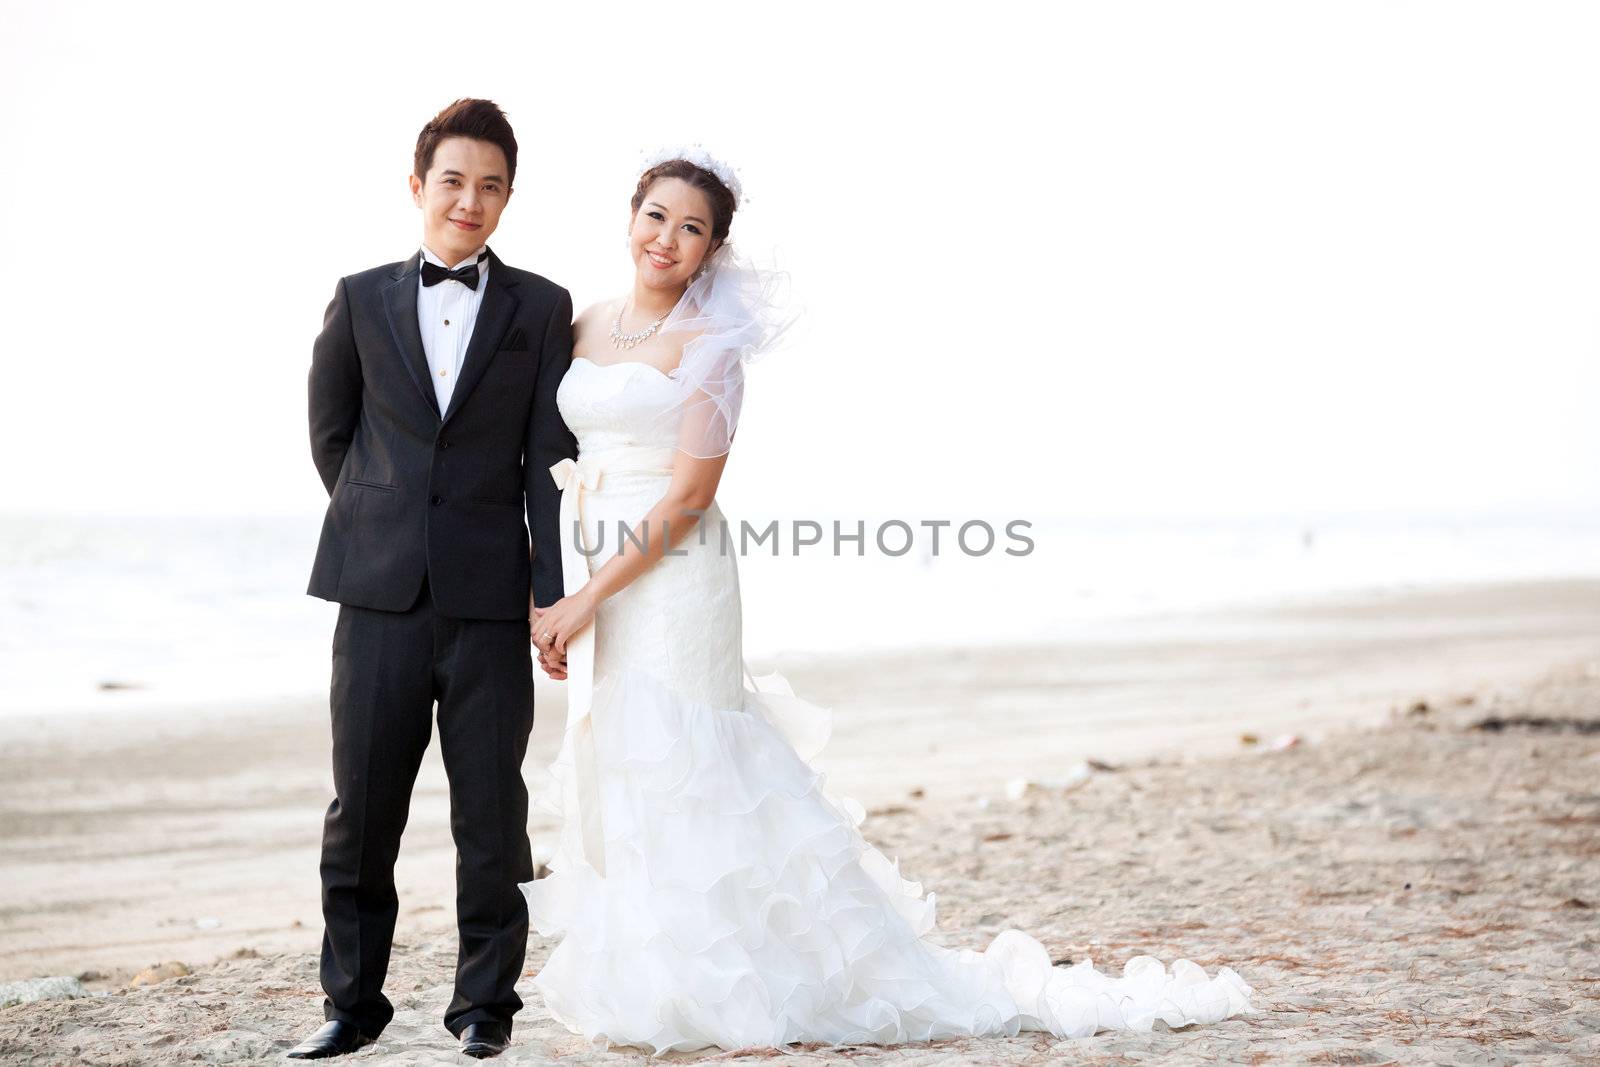 Couples wedding at beach by vichie81